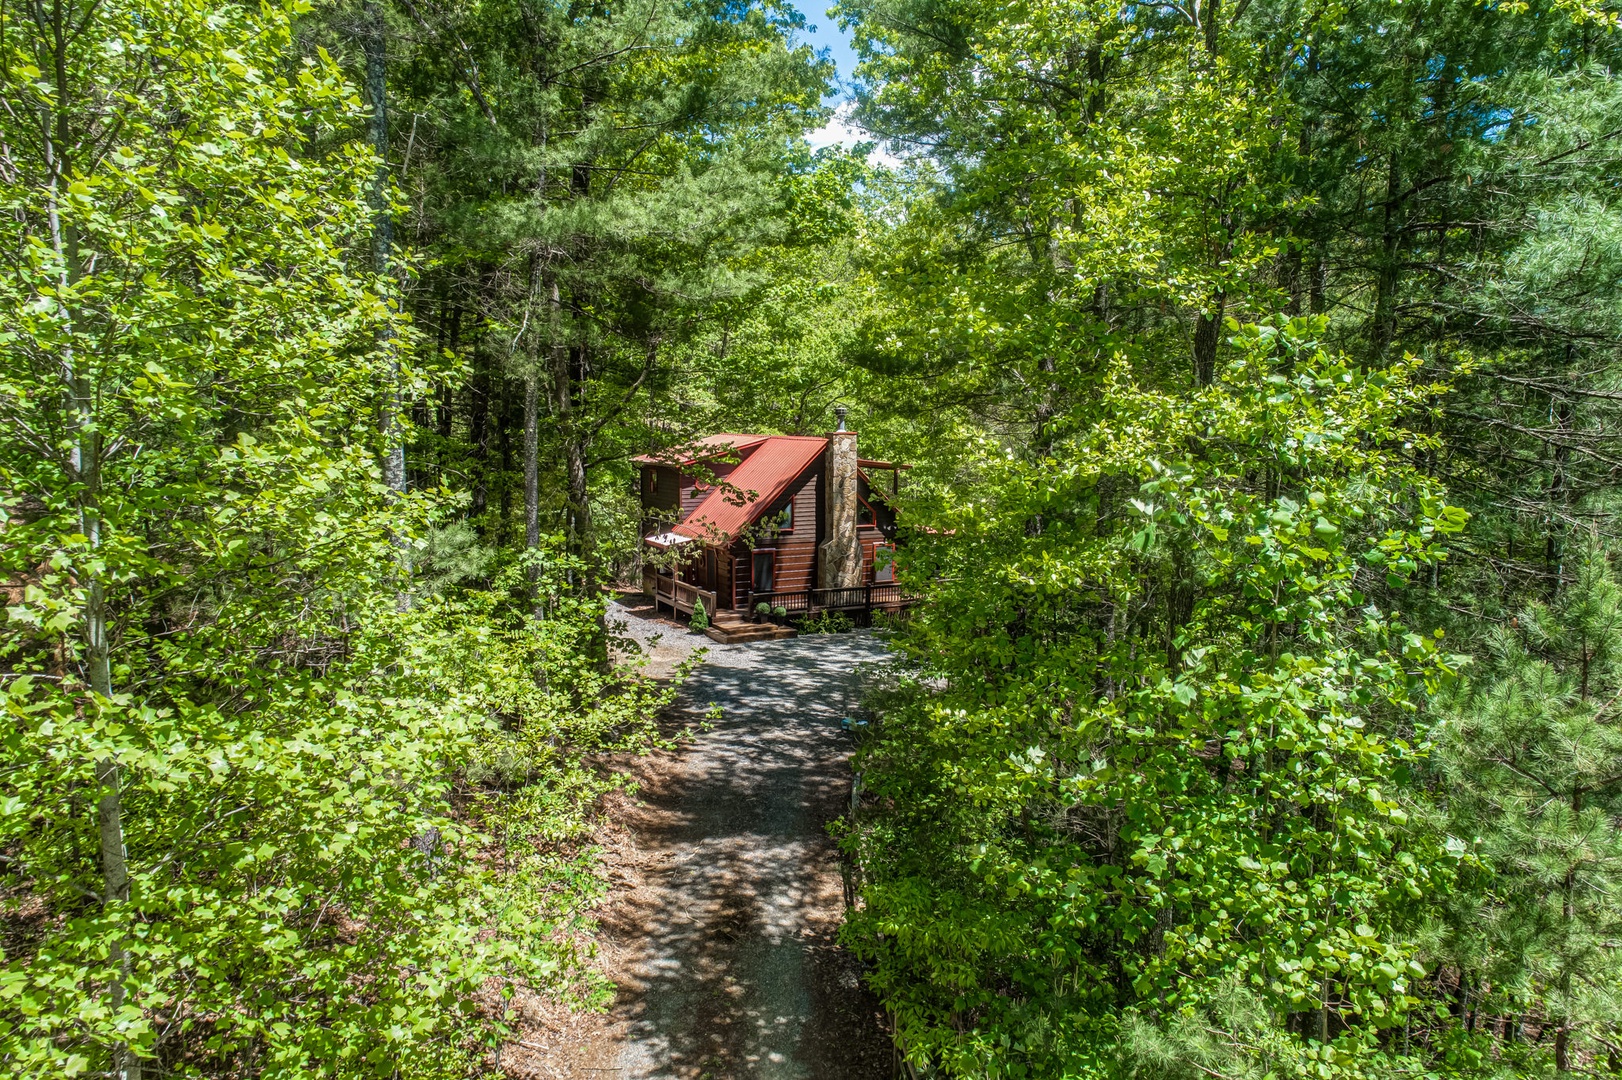 Property is beautifully tucked away in the Aska Adventure area of Cherry Log, GA